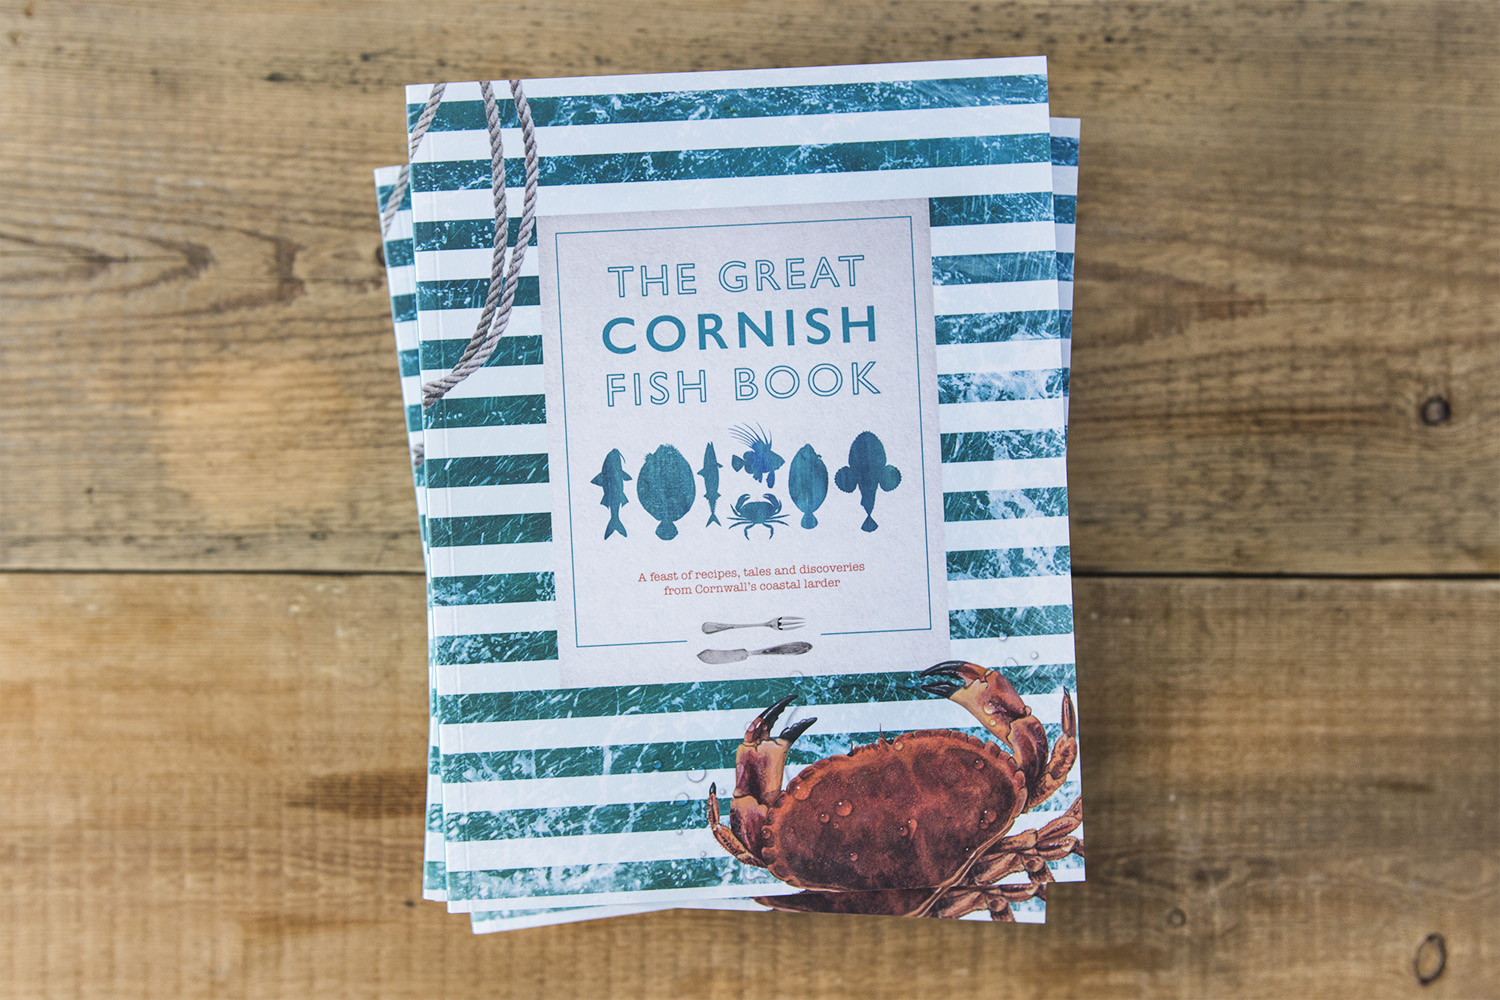 Front cover design of the Great Cornish Fish Book